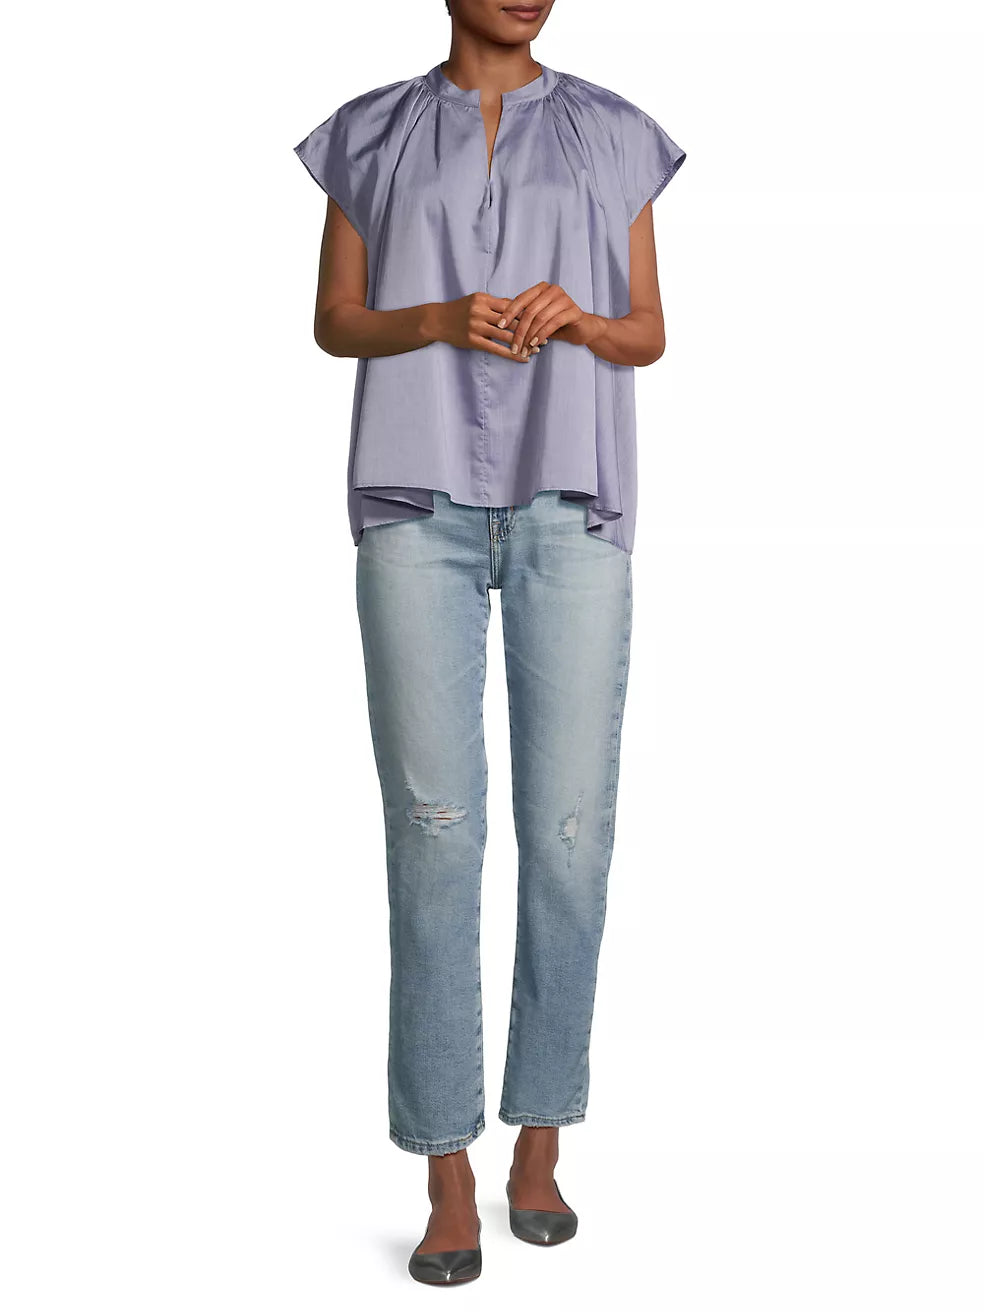 Harshman Finch Popover Blouse - Ice Blue